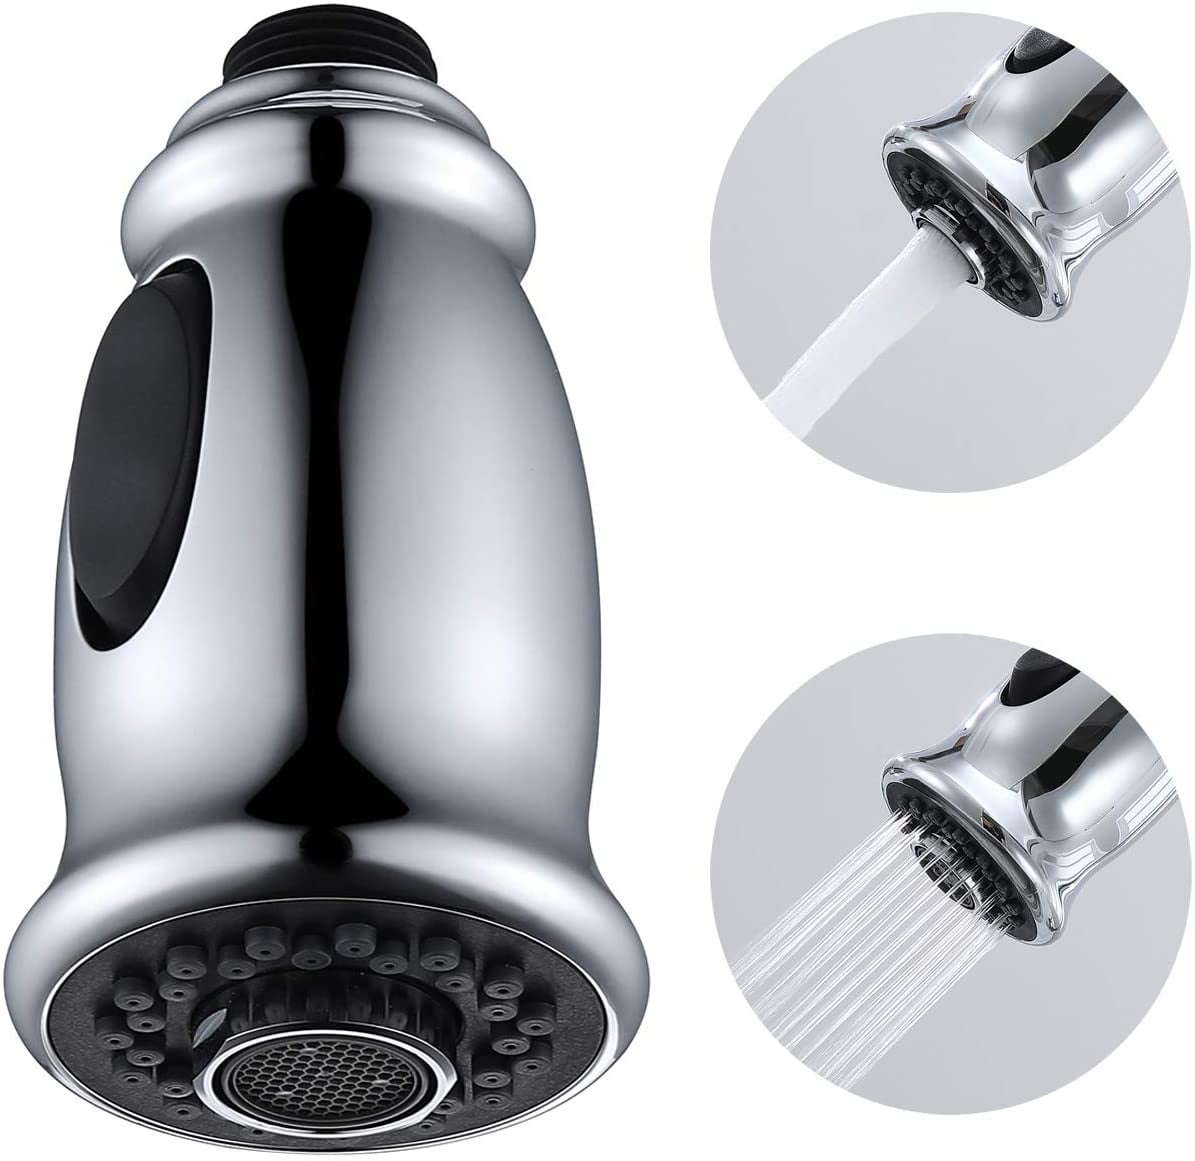 For Kitchen Faucet Pull Out Sprayer Head Nozzle Sink Mixer Tap Water Saving 1/2" 